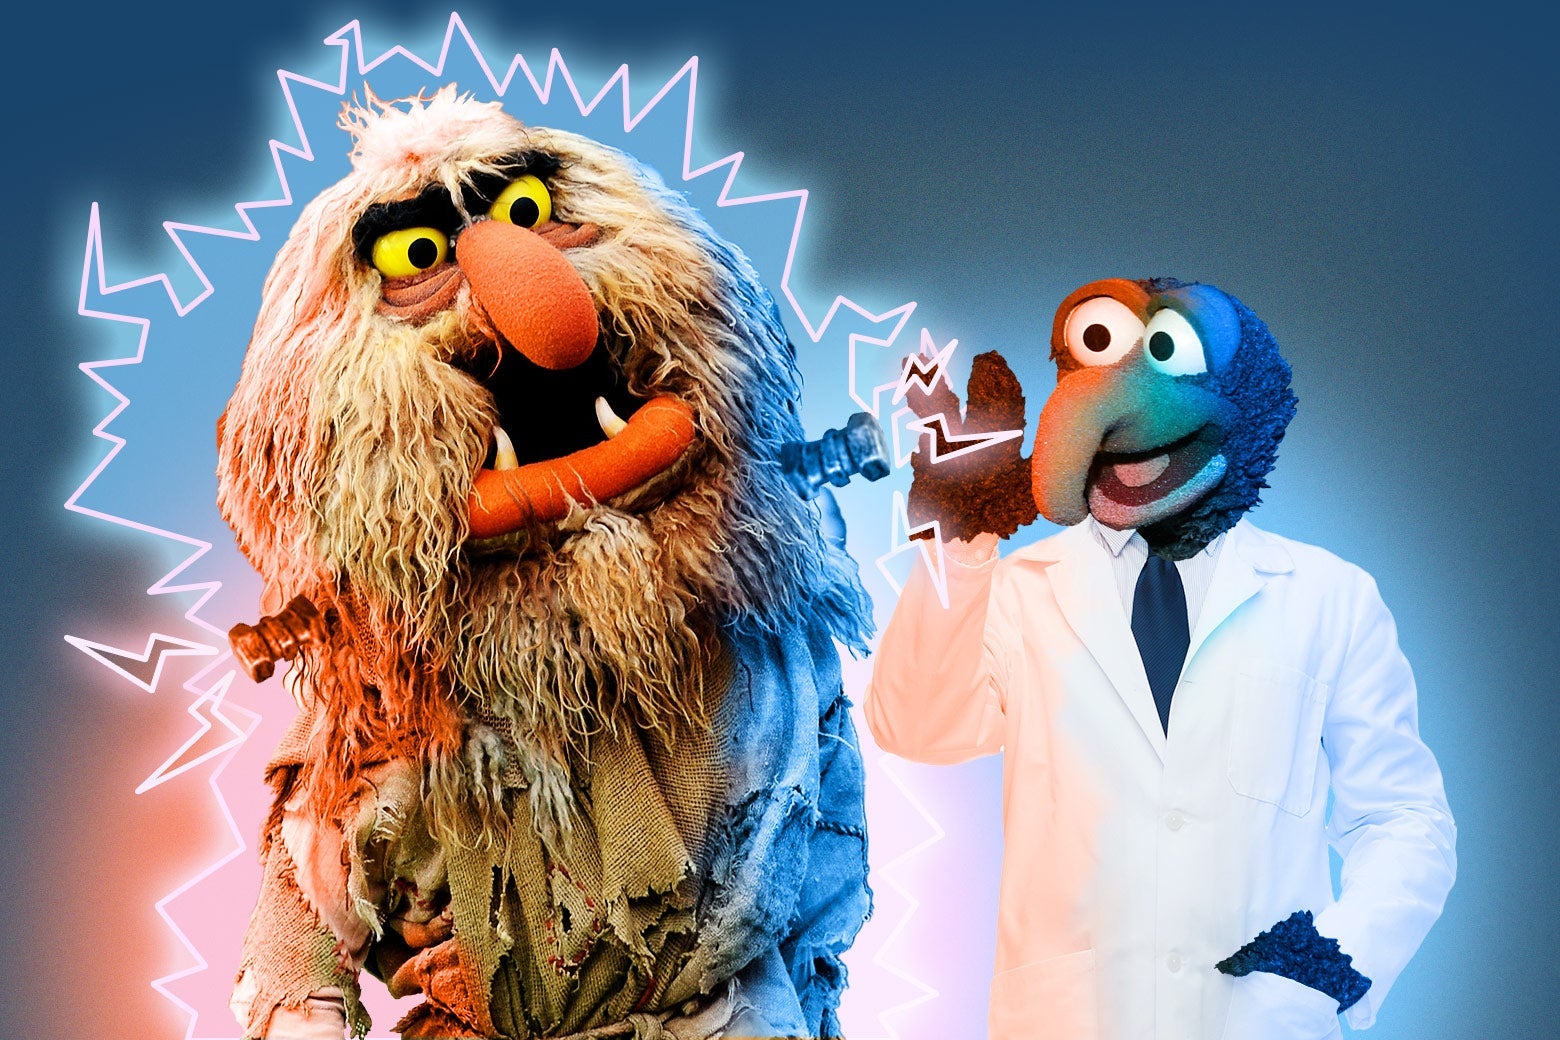 Sweetums the Muppet with Frankenstein bolts in his neck, surrounded by electicity, next to Gonzo the Muppet wearing a lab coat.